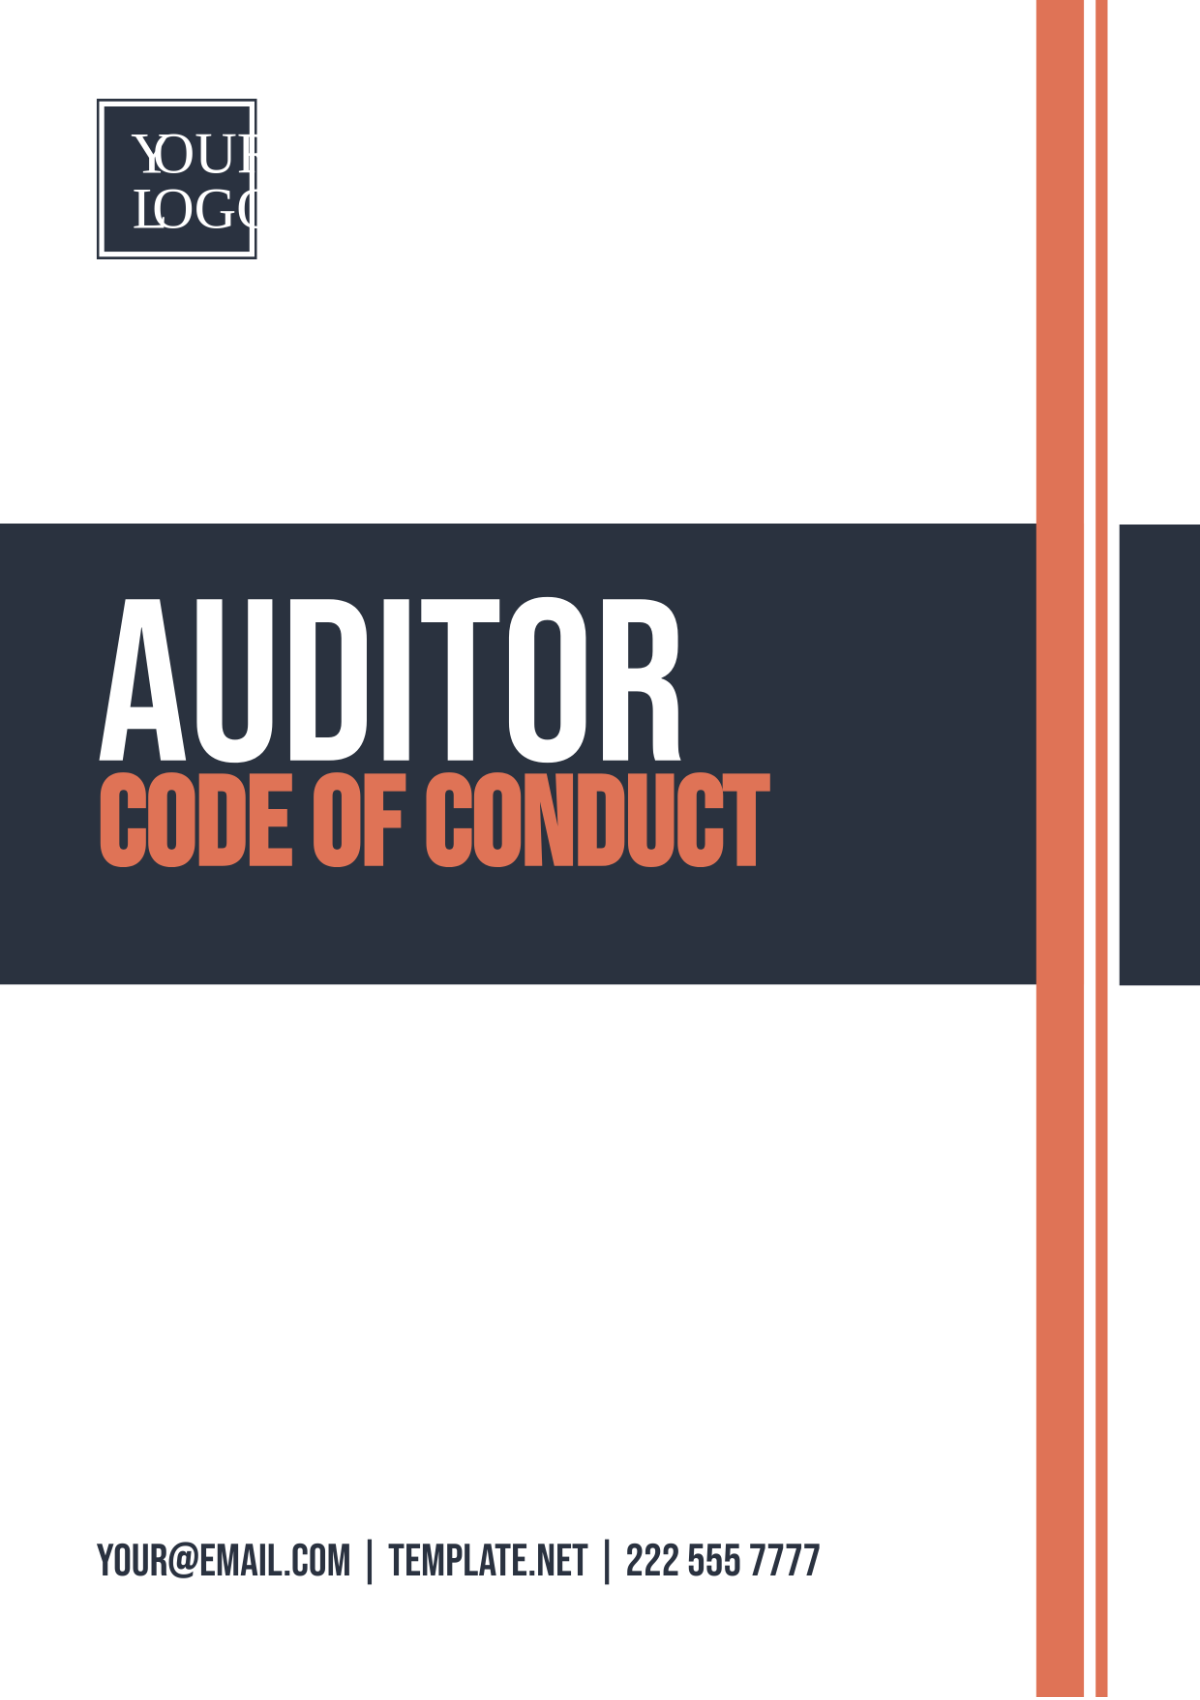 Auditor Code of Conduct Template